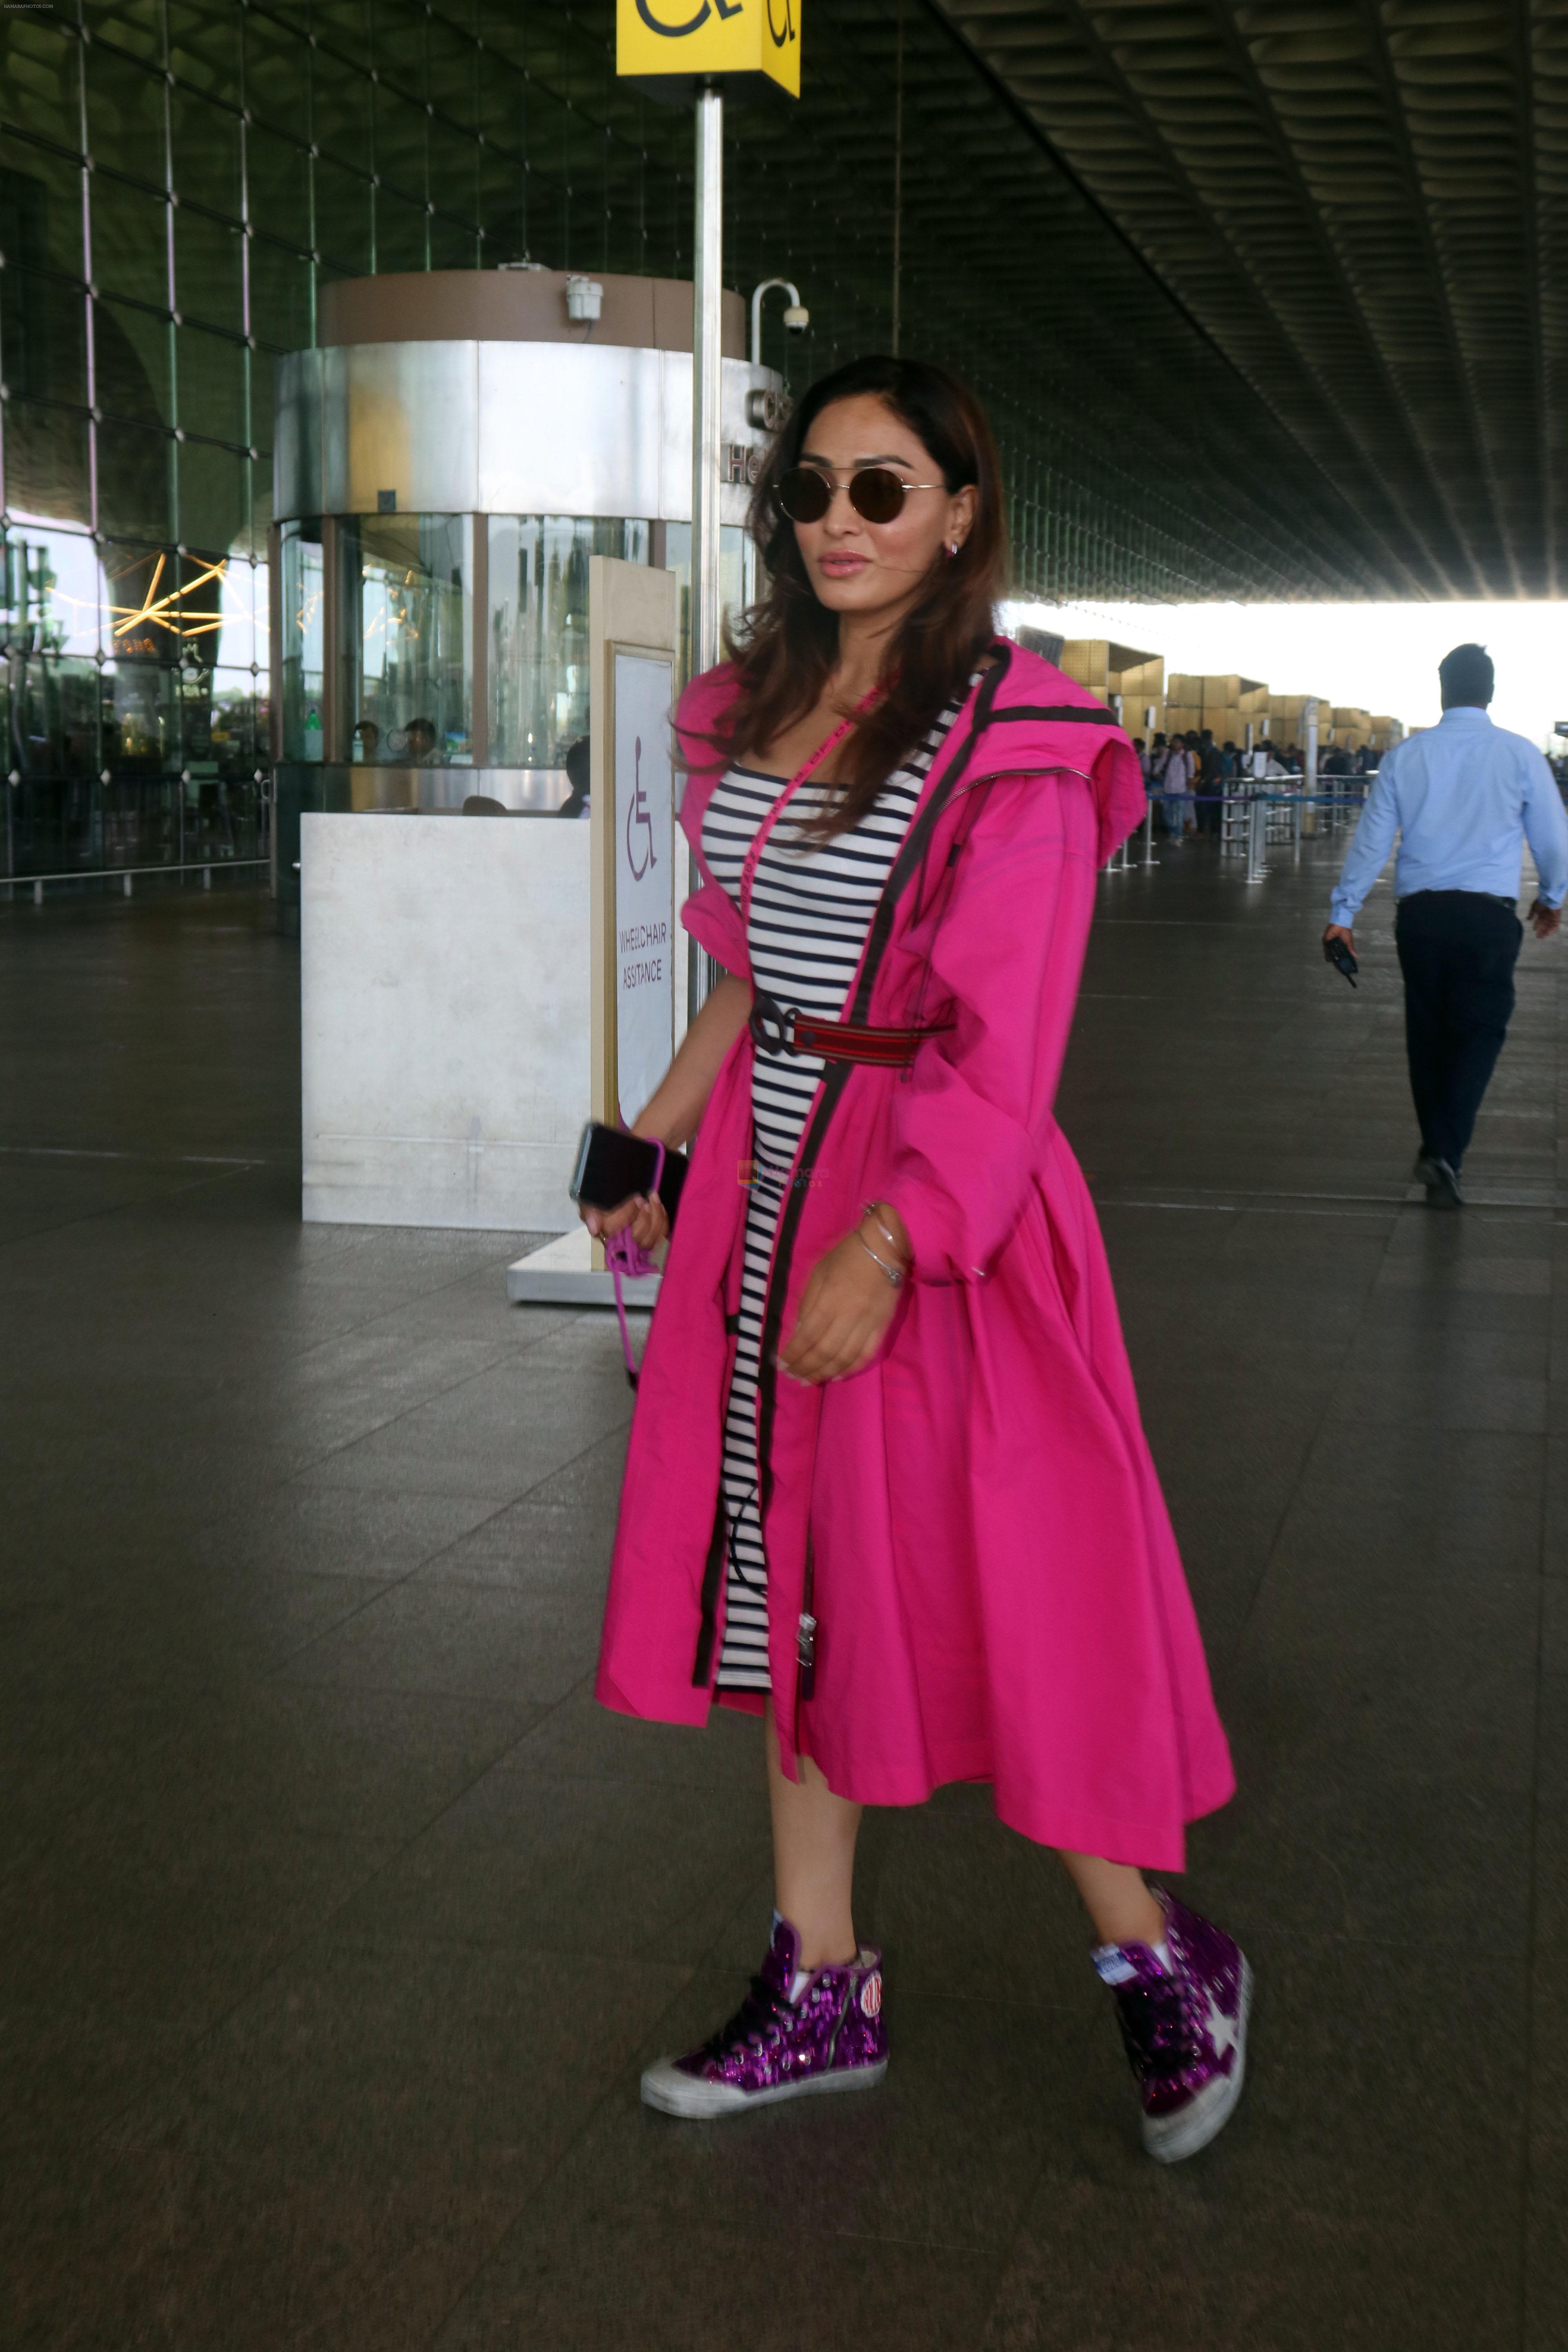 Khushali Kumar wearing a stylish pink coat and sunglasses in a pair of purple high top sneakers